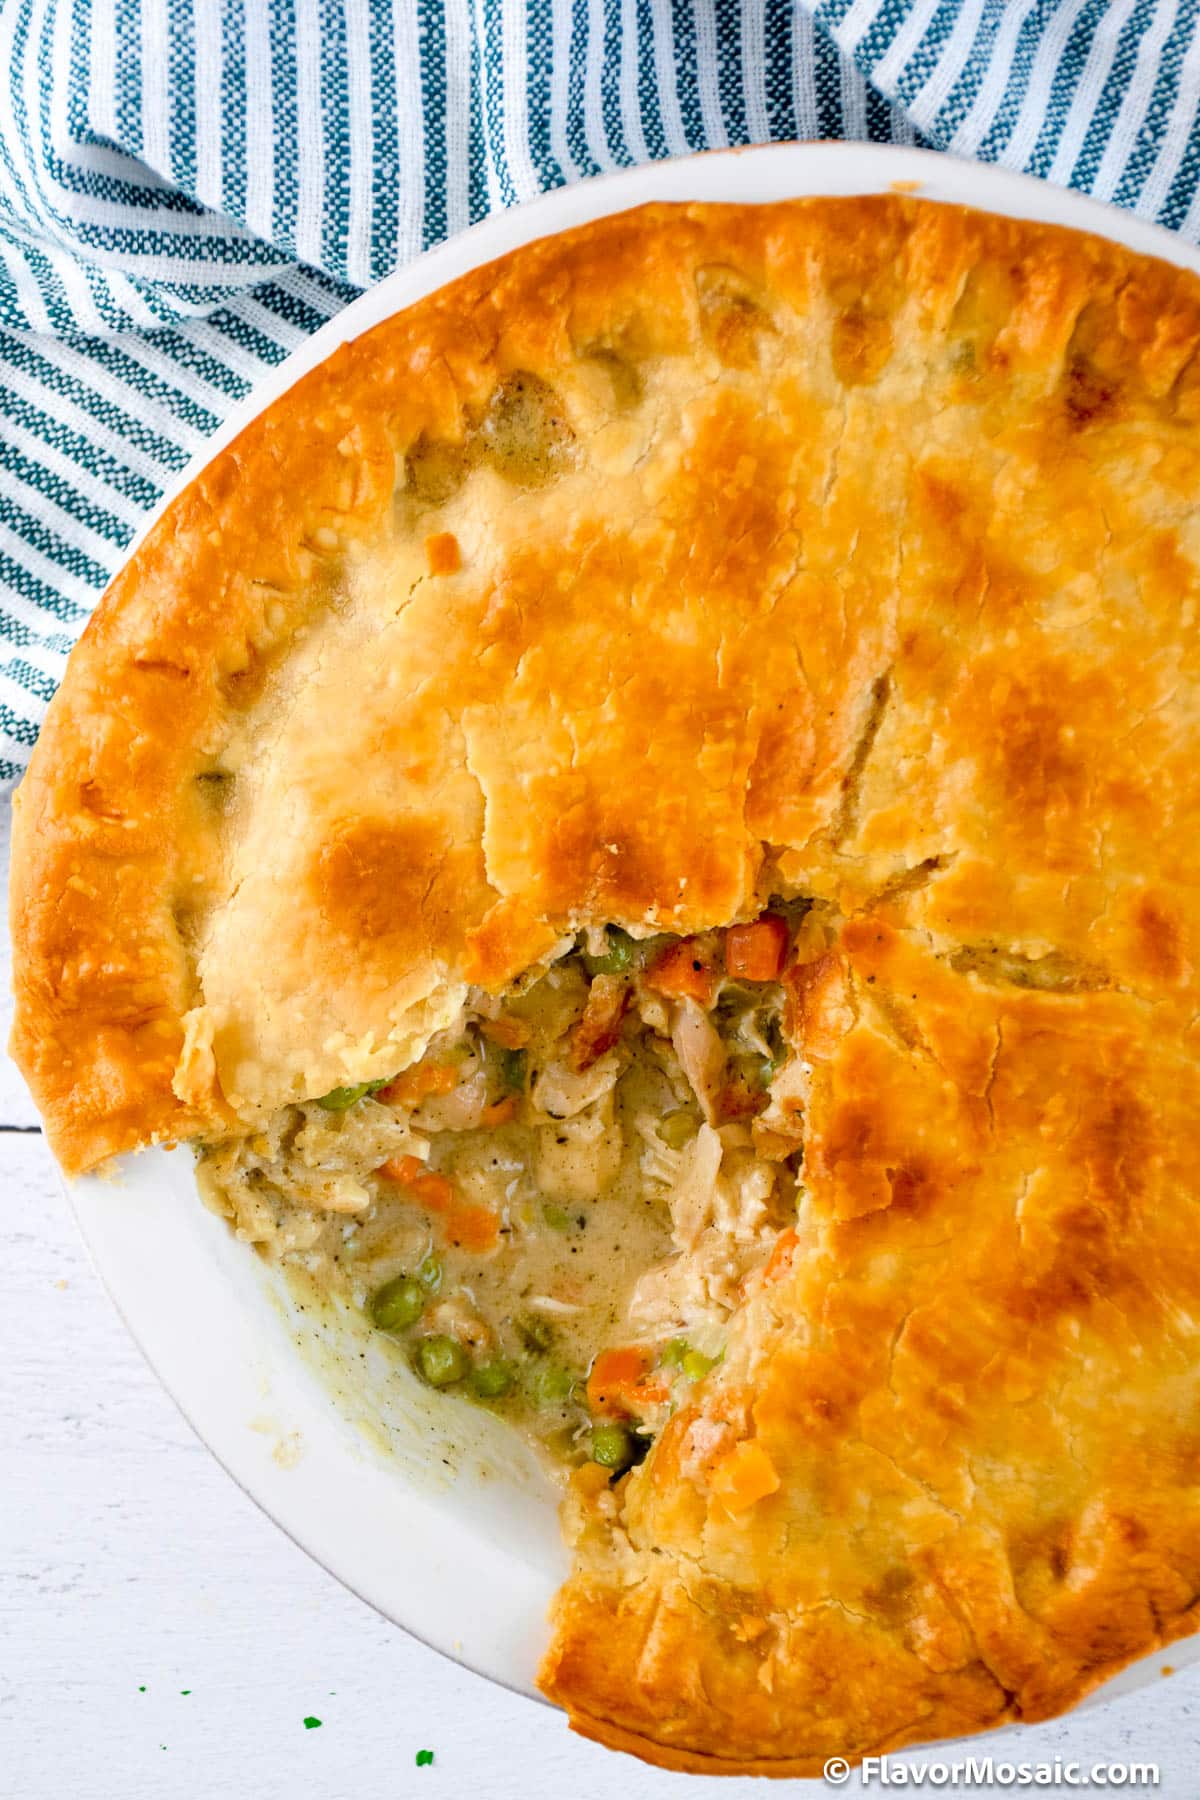 Overhead view of a whole chicken pot pie with one serving taken out of it so you can see the chicken and vegetables under the golden pie crust.